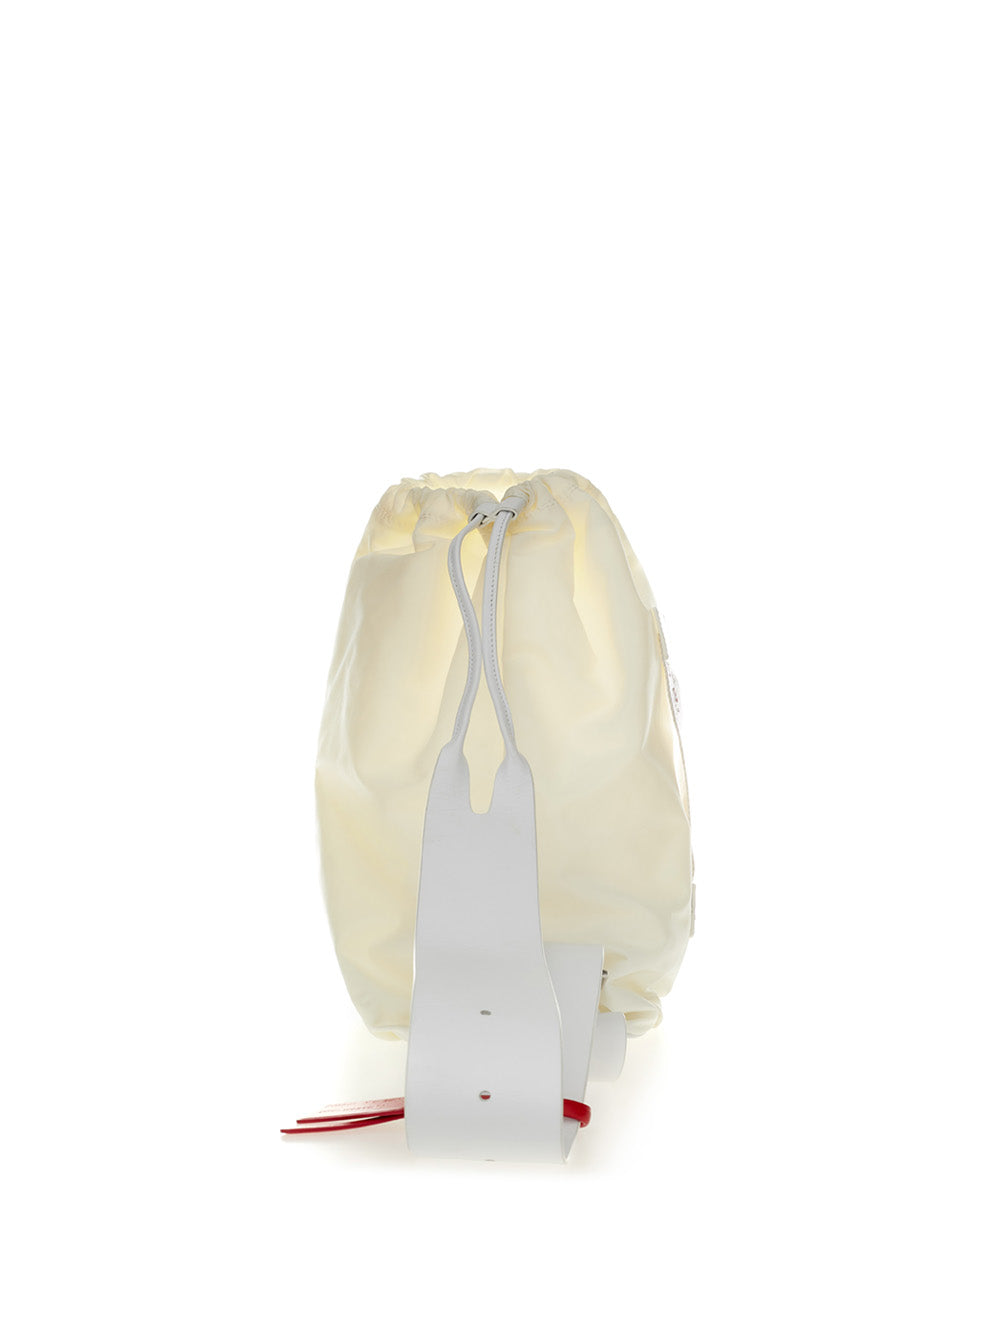 One-shoulder backpack in Off-White technical fabric